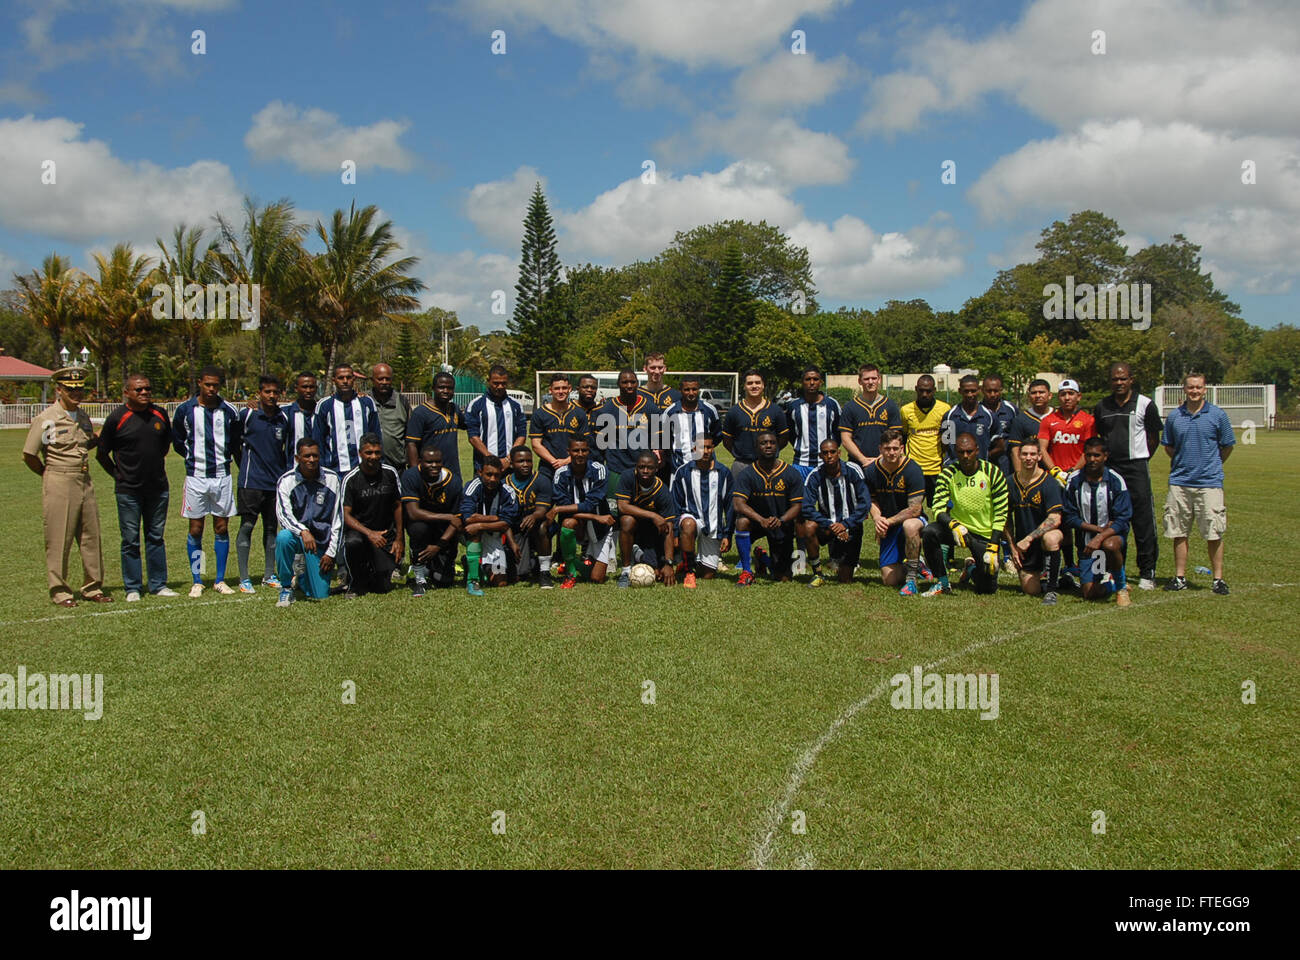 141001-N-GS541-001 PORT LOUIS, Mauritius (Oct. 1, 2014) - Sailors from the Arleigh Burke-class guided-missile destroyer USS James E. Williams (DDG 95) and local Mauritian police force pose for a photo before a friendly game of soccer. James E. Williams, homeported in Norfolk, Va., is conducting naval operations in the U.S. 6th Fleet area of operations in support of U.S. national security interests in Africa. (U.S. Navy photo by Ensign Michael Scarborough) Stock Photo